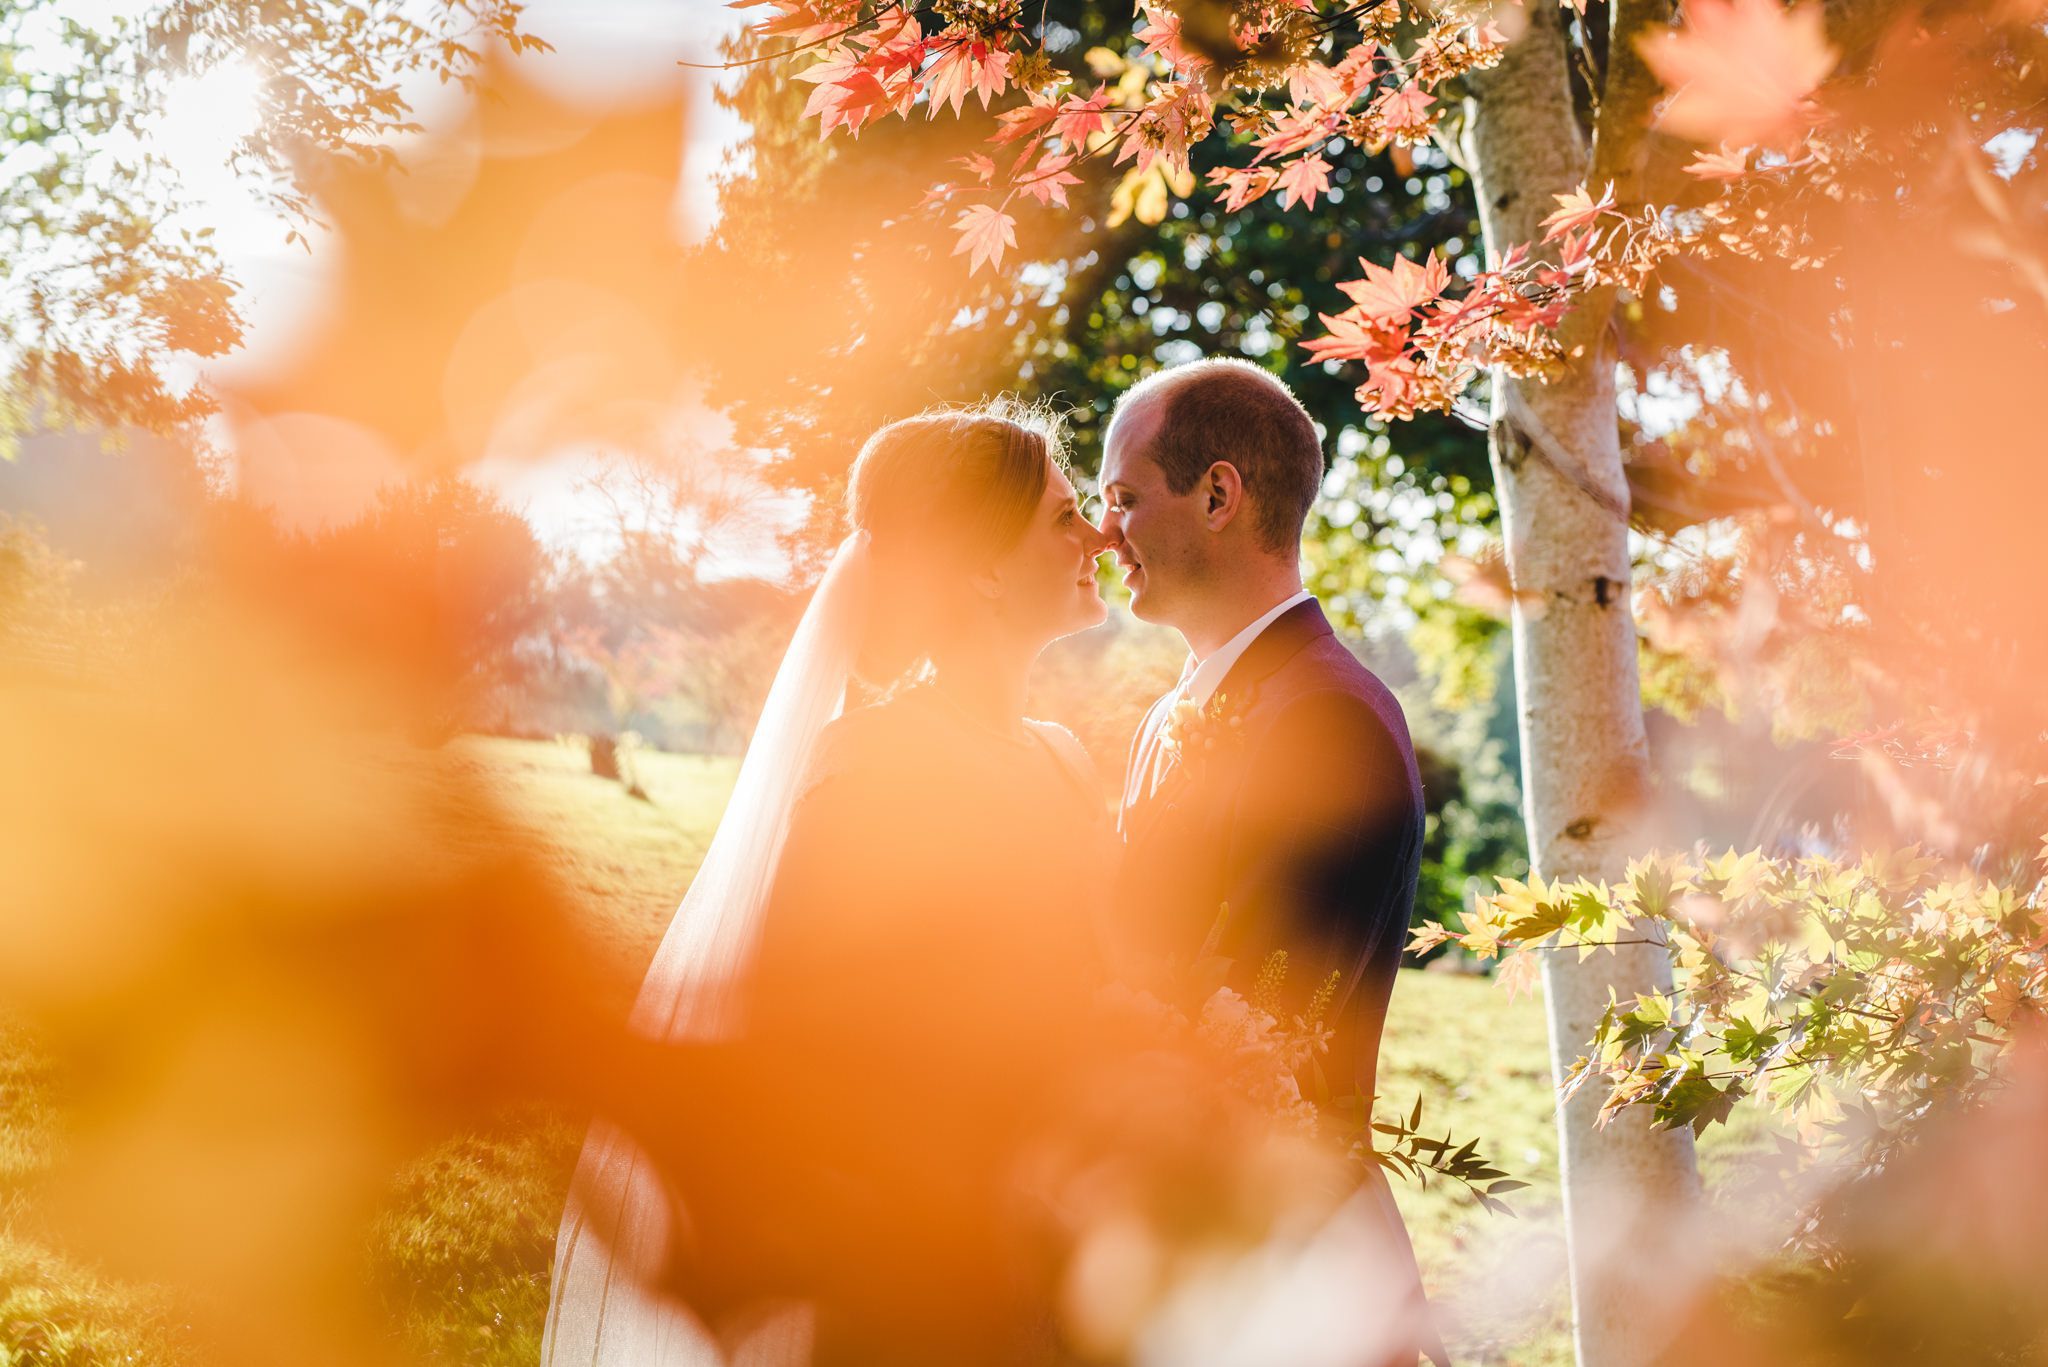 Autumn wedding photography at Owlpen Manor by Bigeye Photography